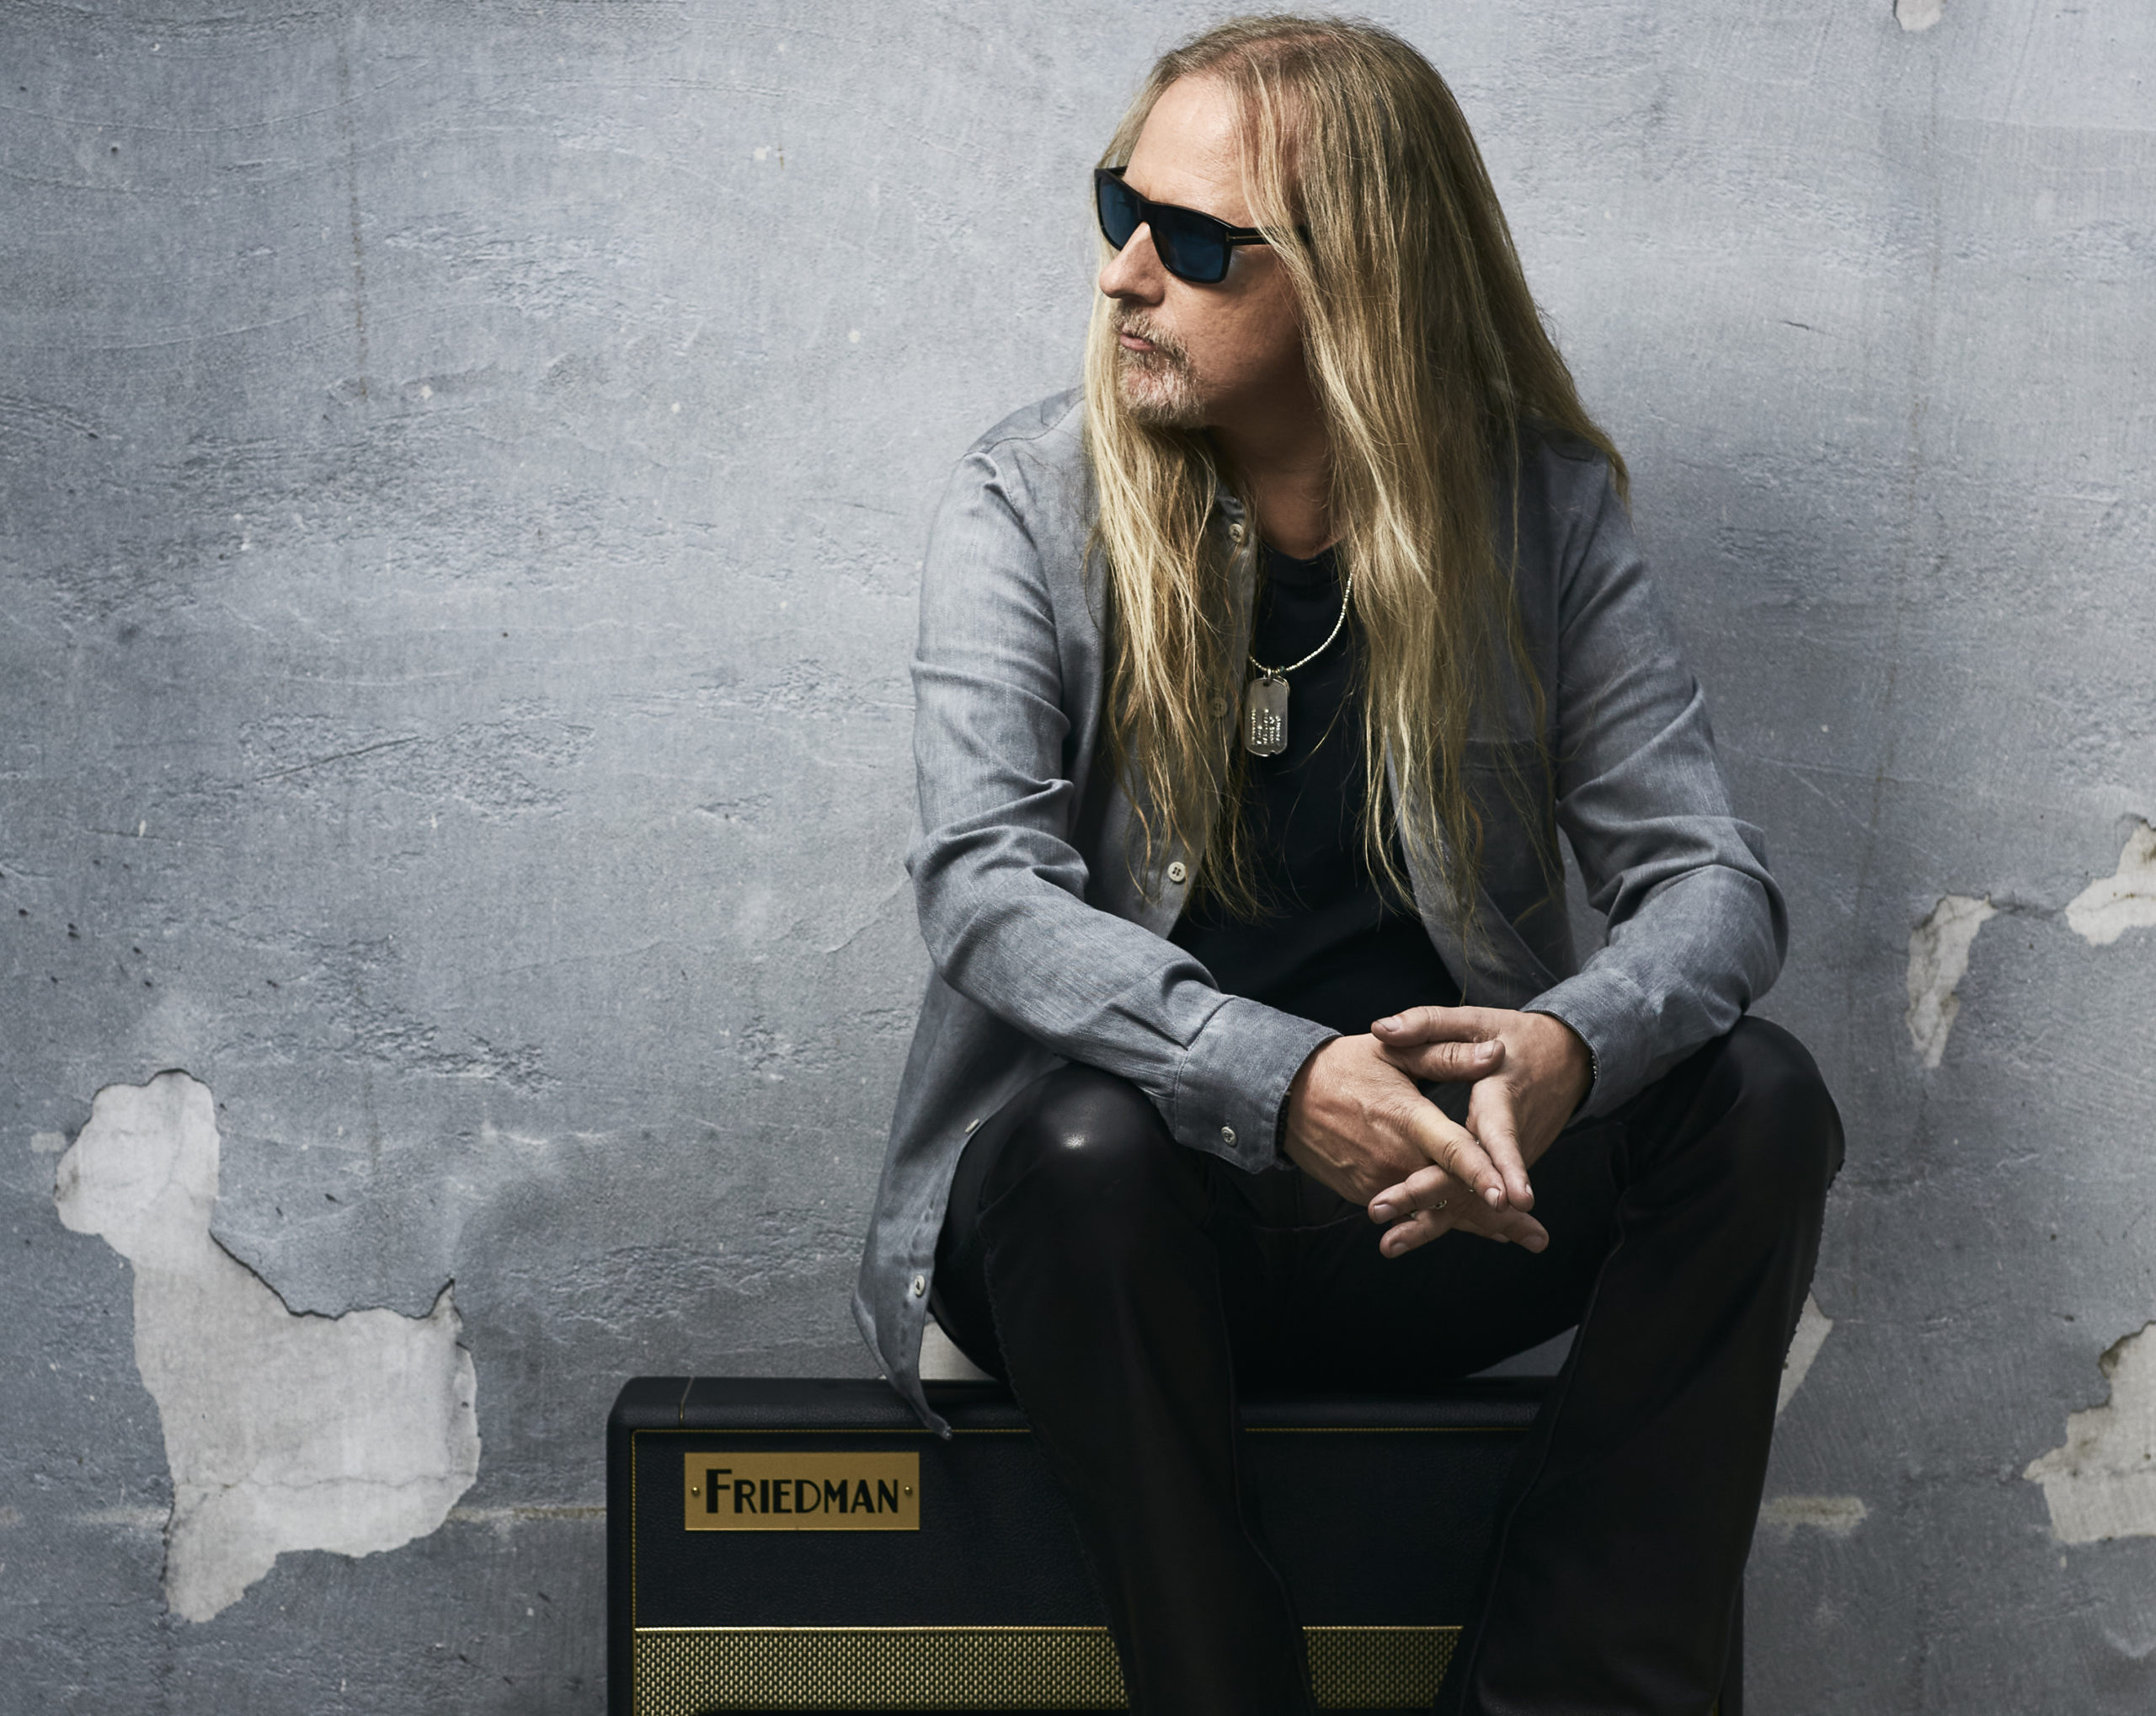 Jerry Cantrell, Alice in Chains origins, Lipps service interview, Music industry, 2560x2040 HD Desktop